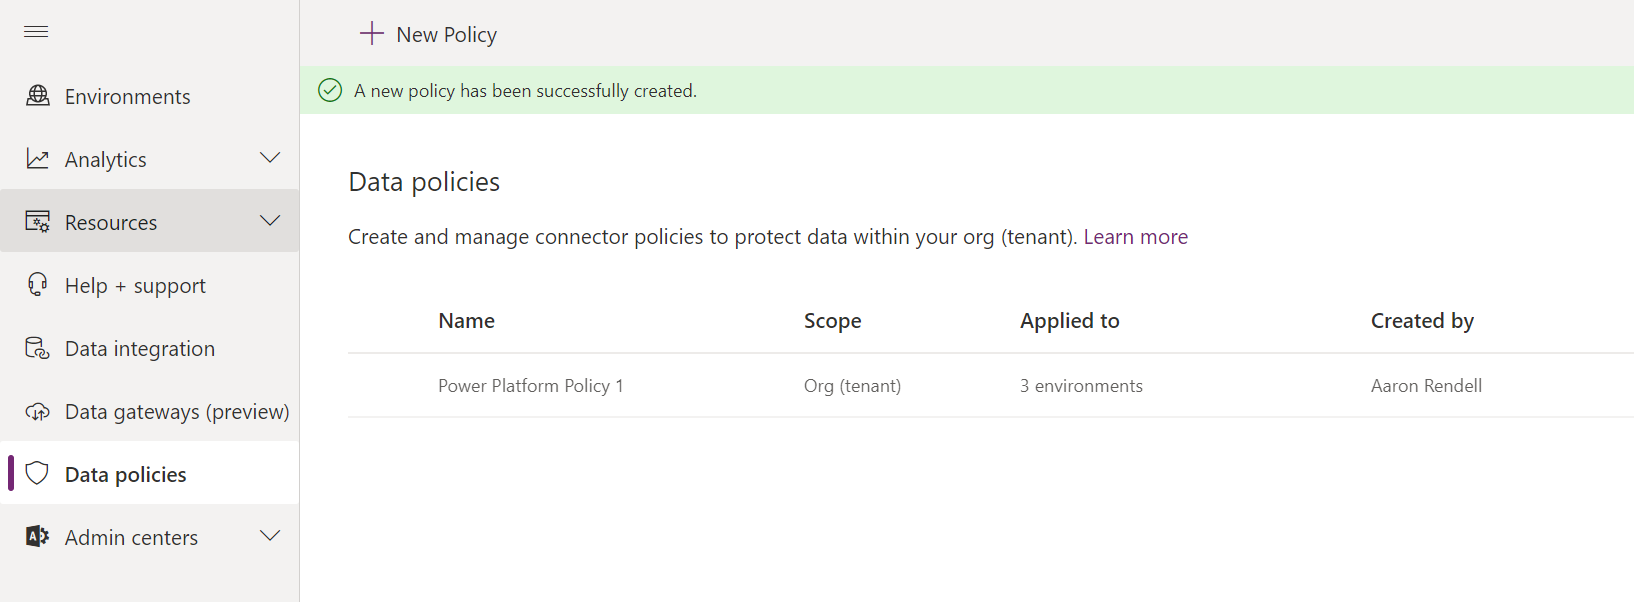 Image of the Data policies page showing a message that your new policy has been successfully created.